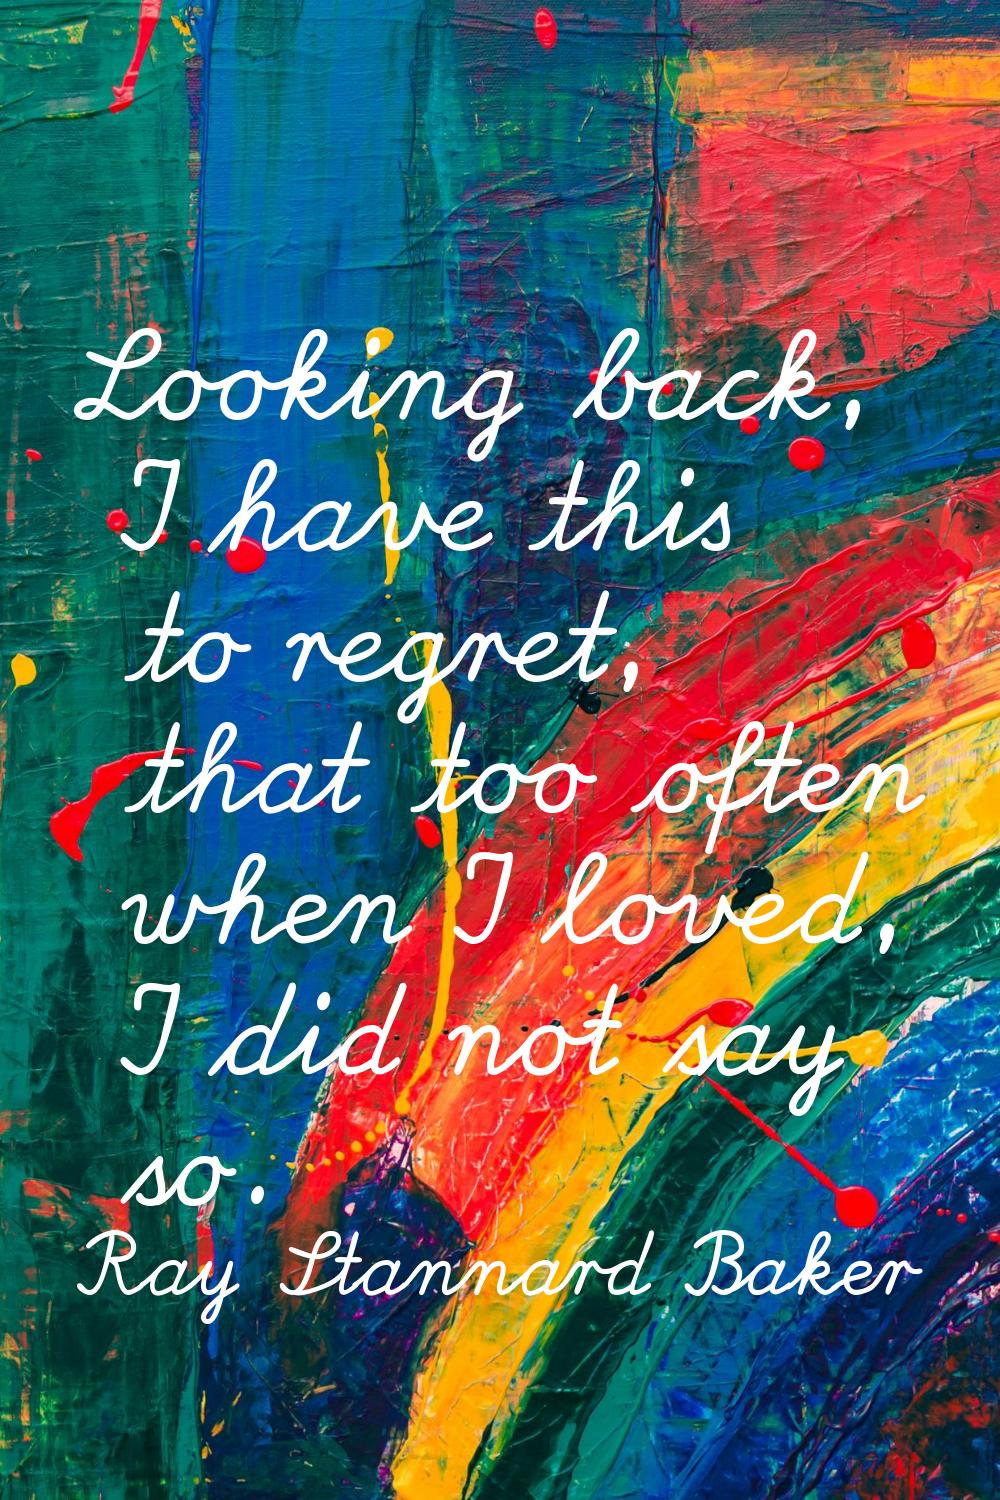 Looking back, I have this to regret, that too often when I loved, I did not say so.